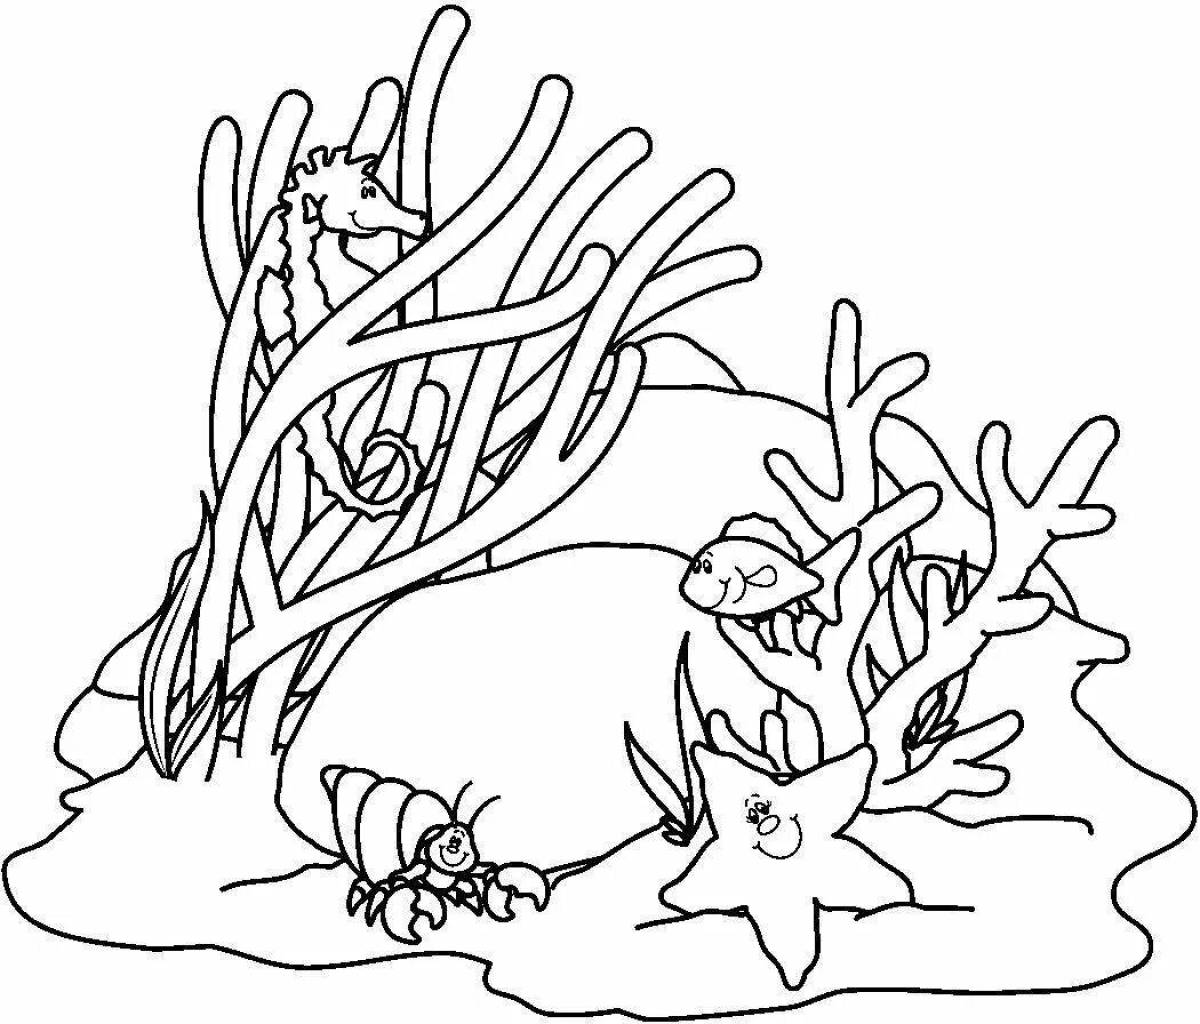 Shiny coral coloring pages